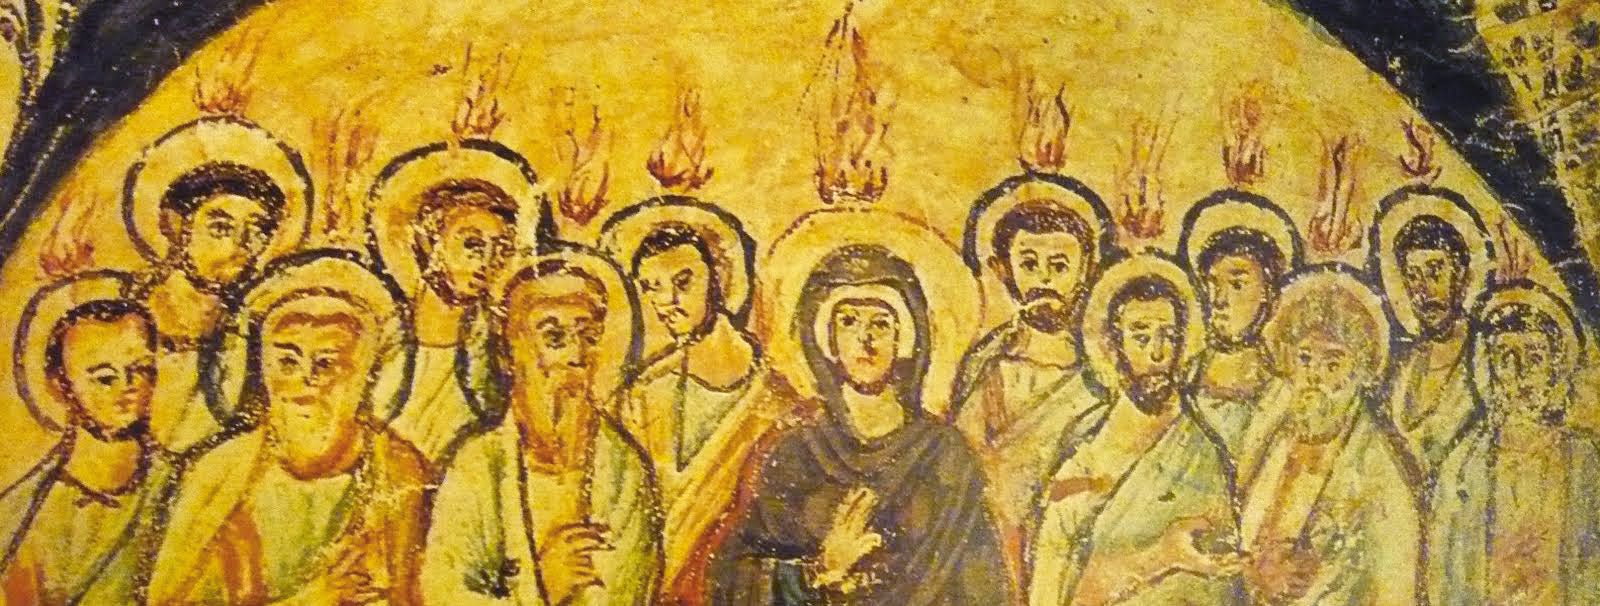 Confusion or Communion - Seeking the Peace of Pentecost in Our Time - Holy Cross Monastery